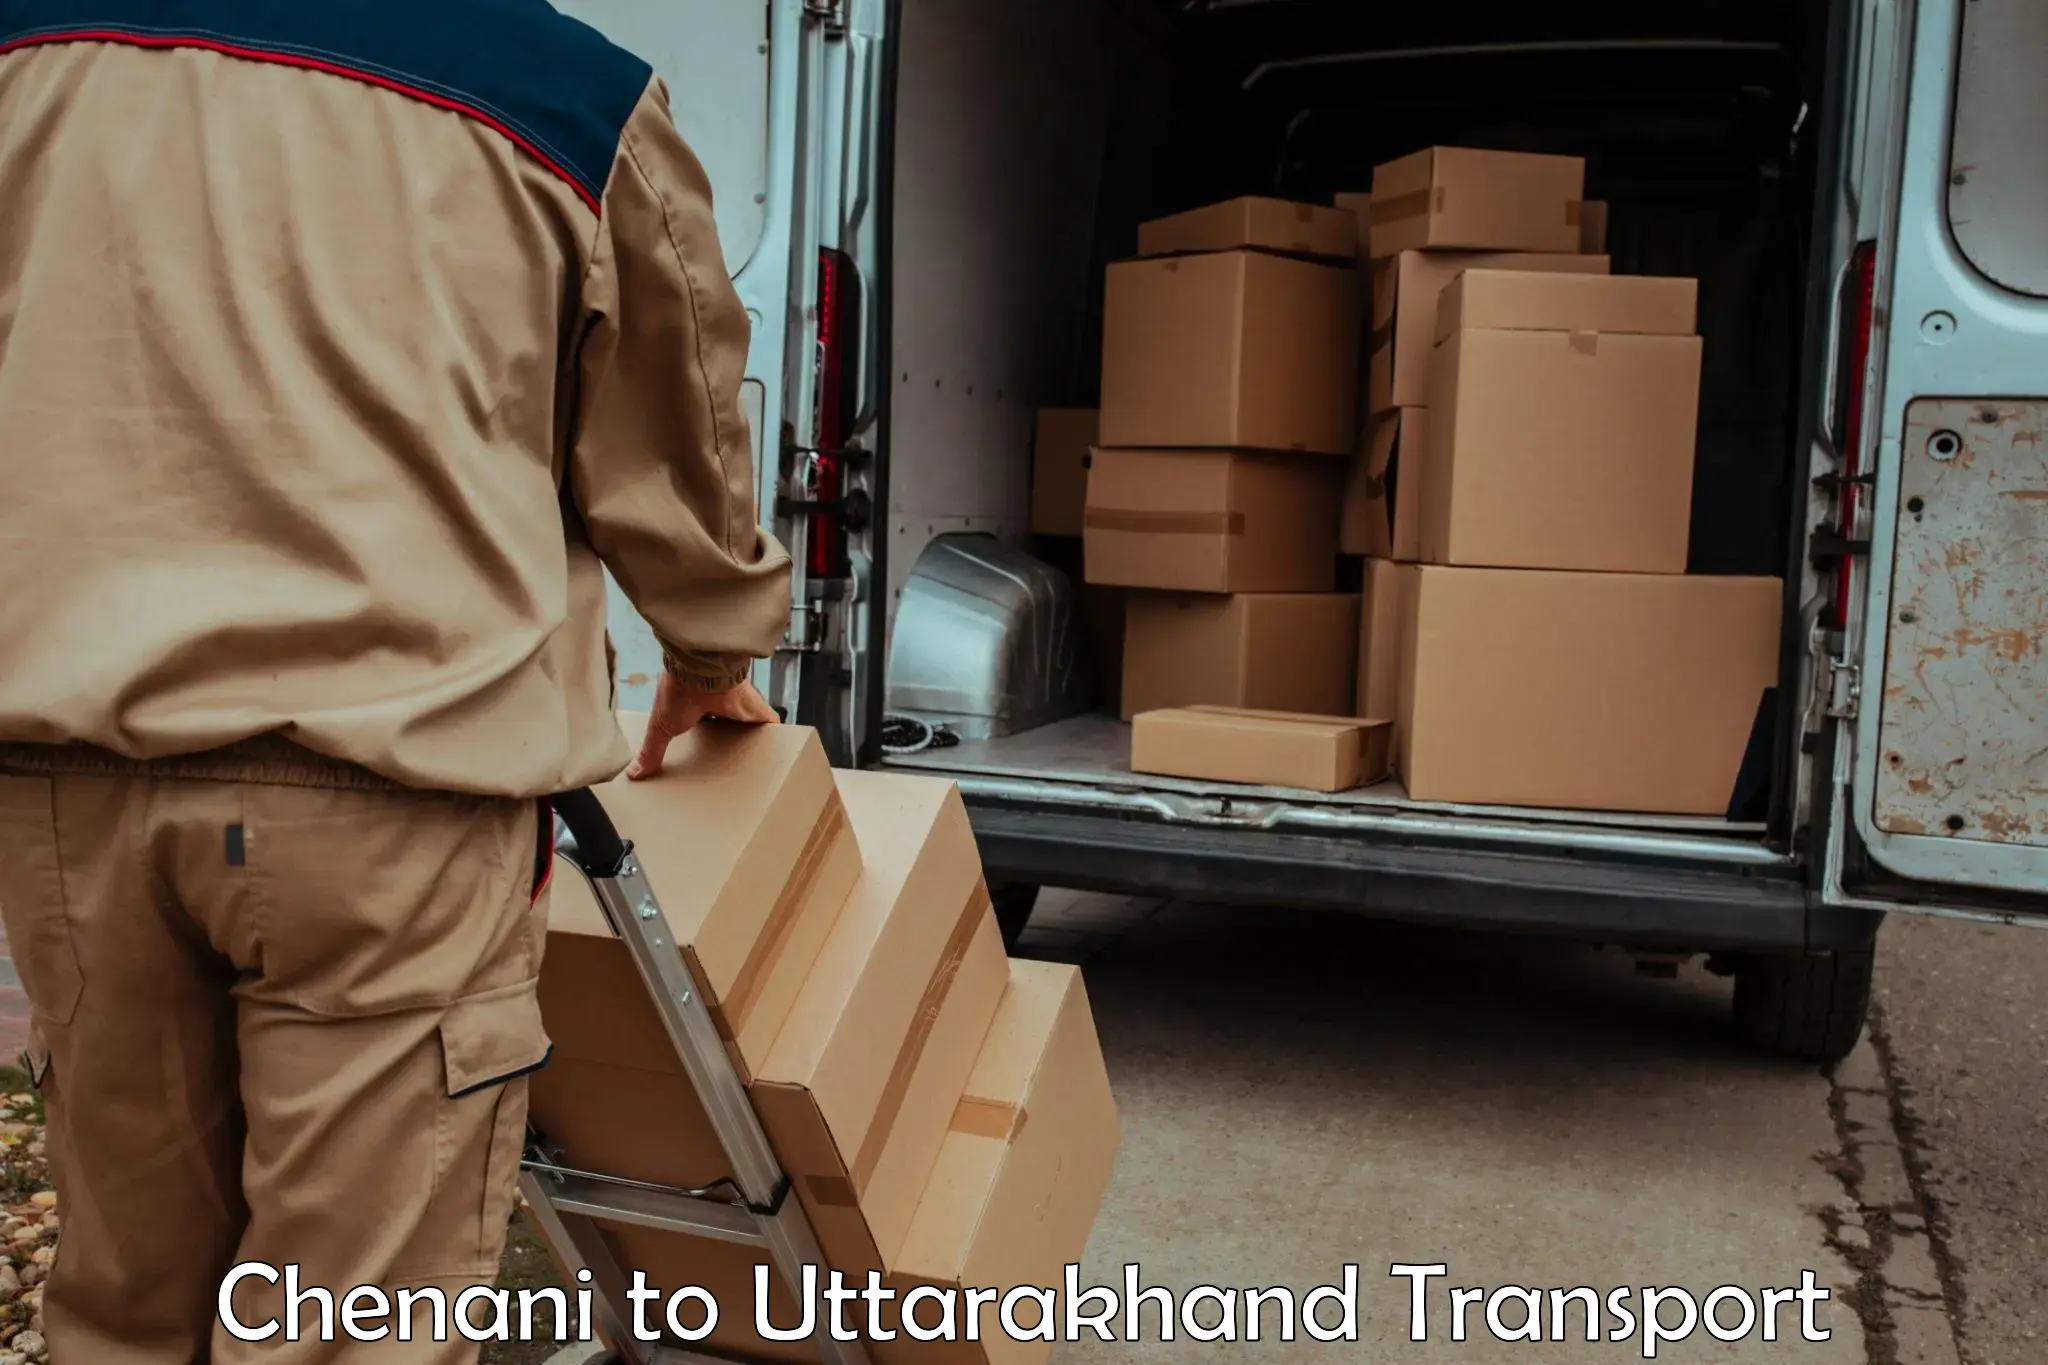 Nationwide transport services in Chenani to IIT Roorkee